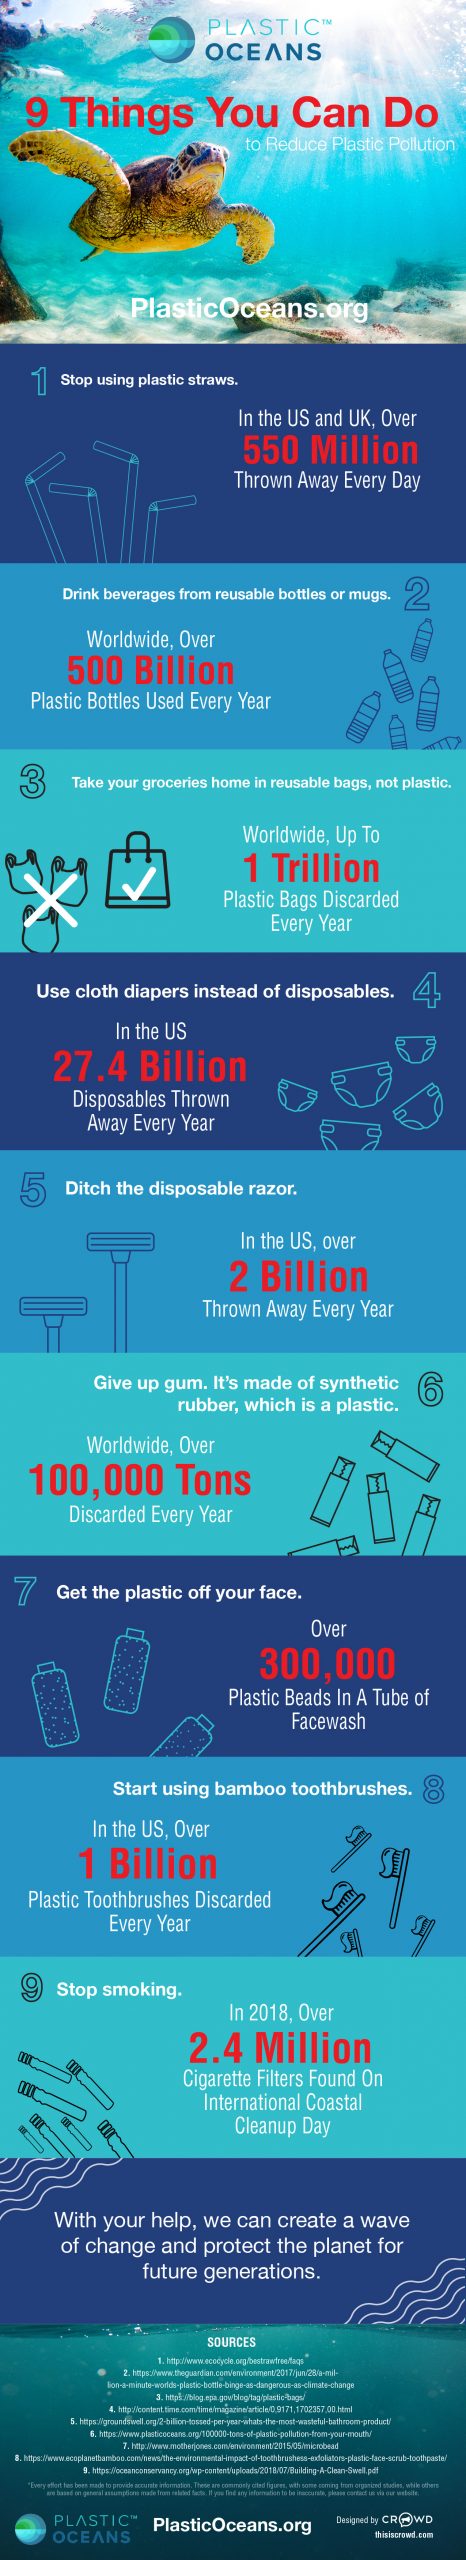 9 Tips to Reduce Plastic Pollution Infographic.